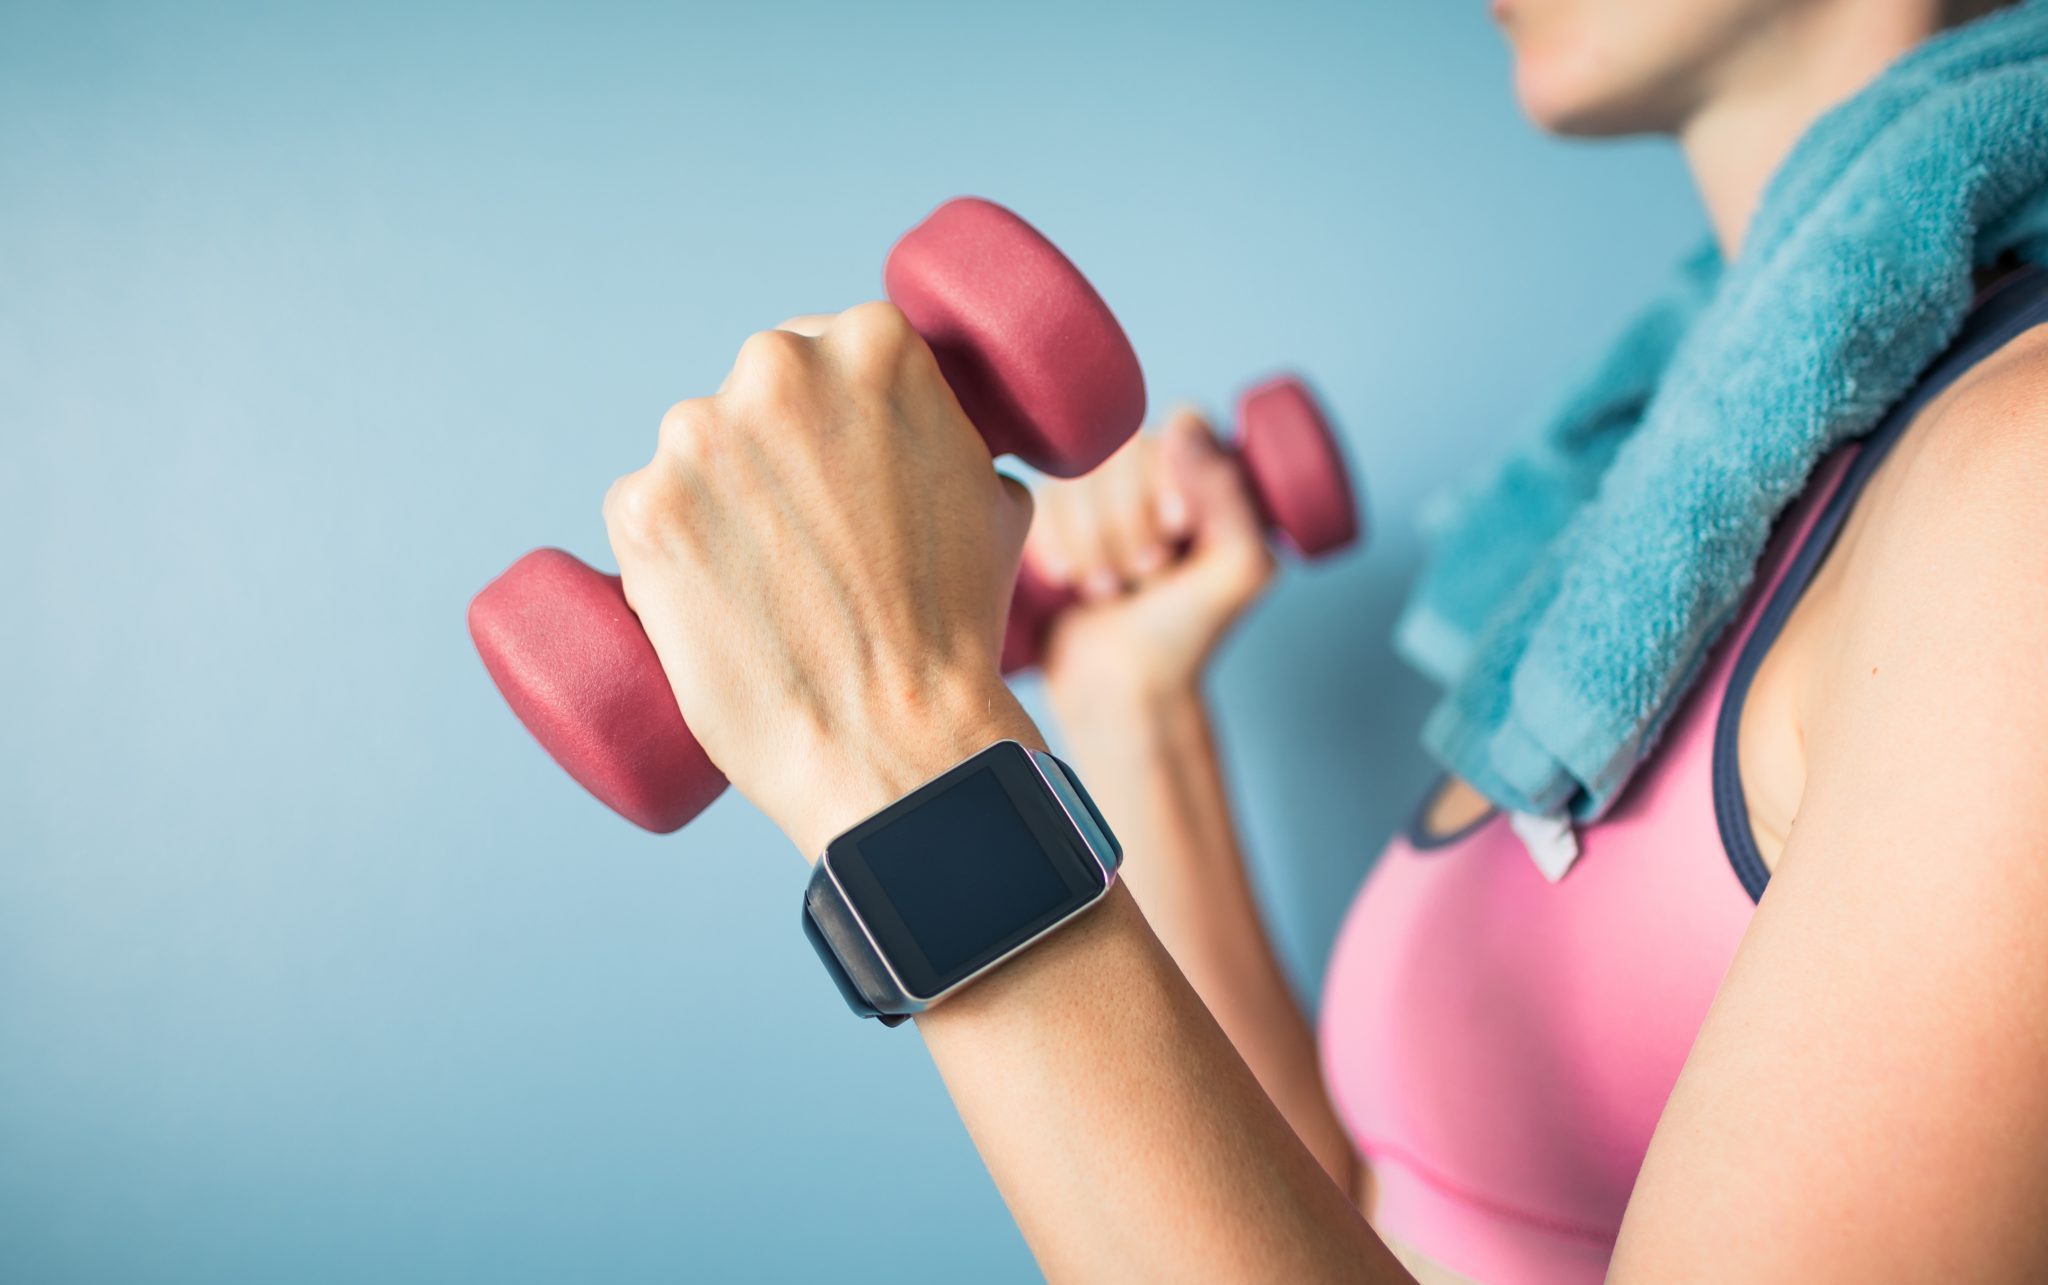 How To Turn On Fitness Tracker